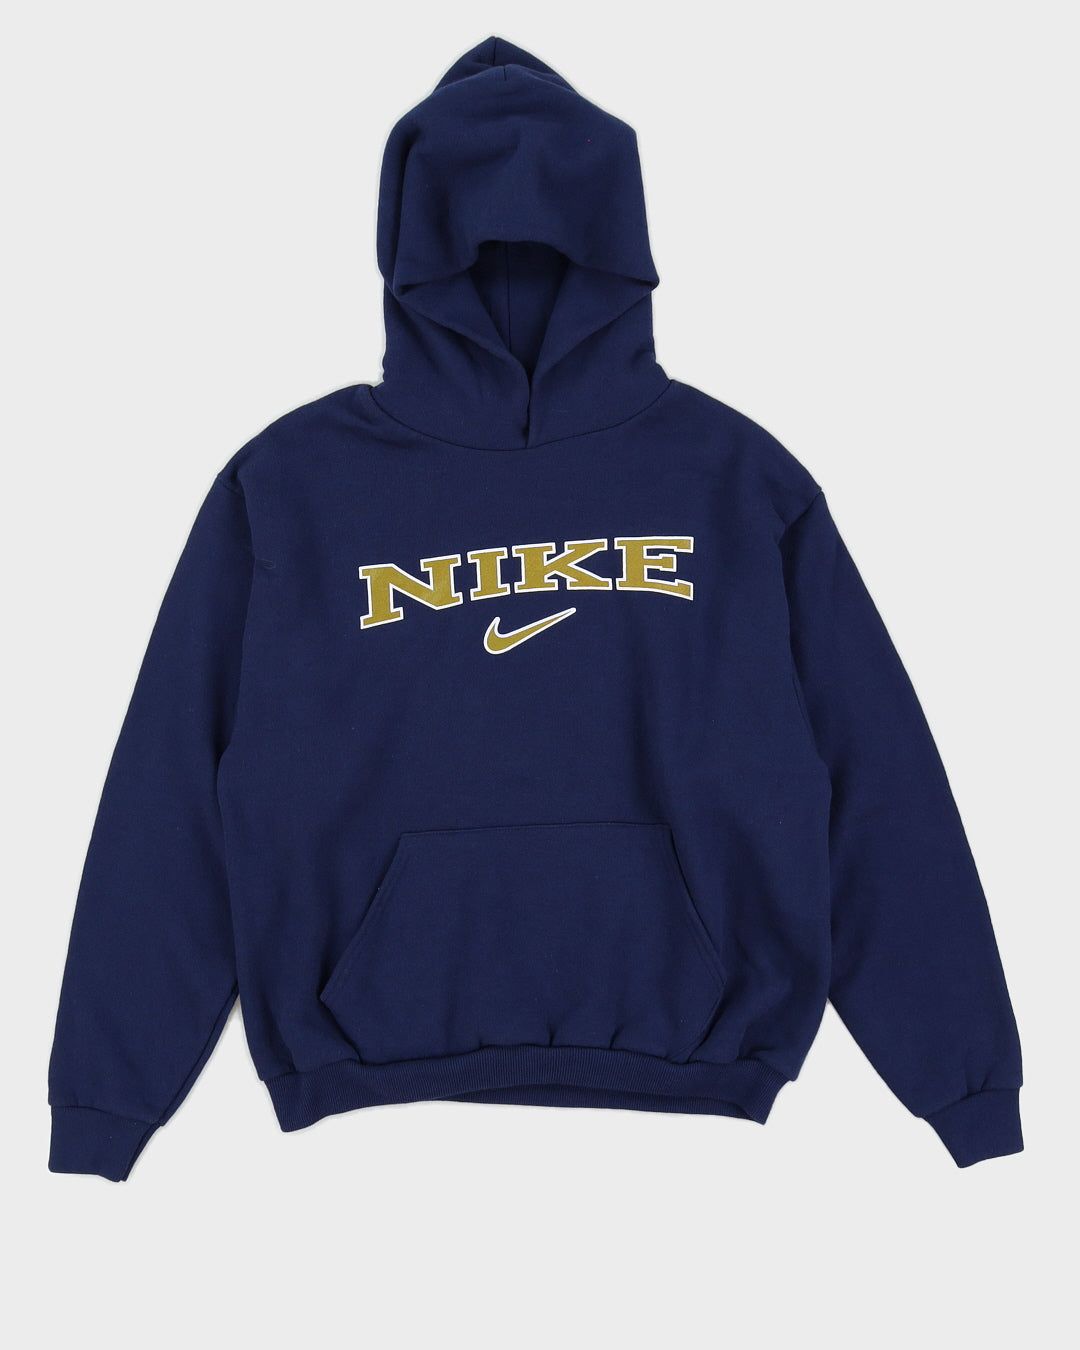 Vintage 90s Nike Blue Hoodie With Big Graphic Logo - S